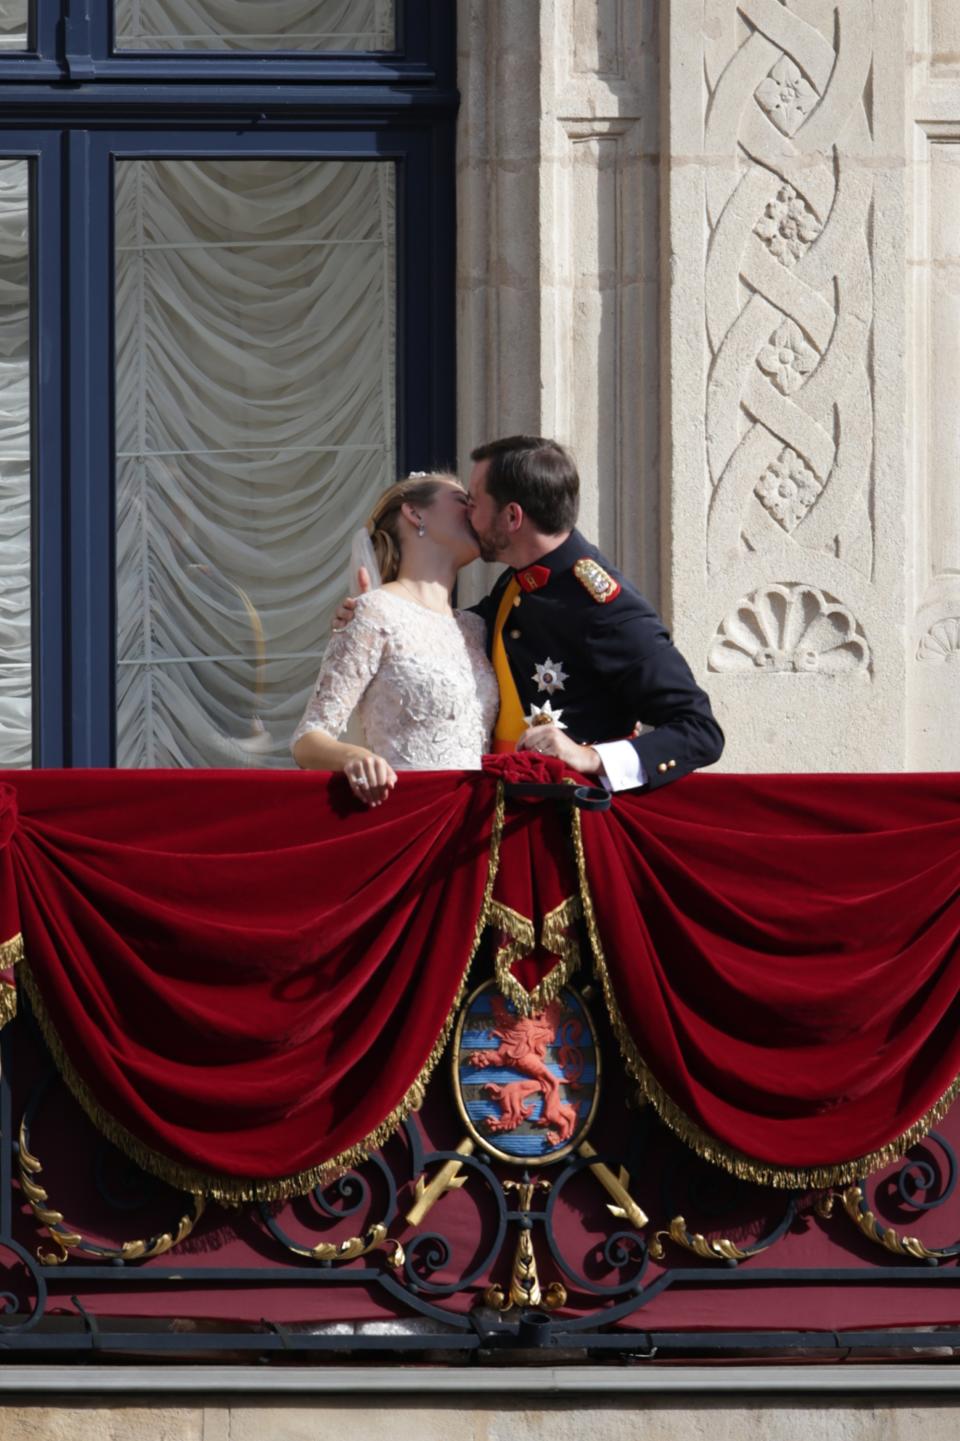 LUXEMBOURG - OCTOBER 20: (NO SALES, NO ARCHIVE) In this handout image provided by the Grand-Ducal Court of Luxembourg, Princess Stephanie of Luxembourg and Prince Guillaume of Luxembourg kiss on the balcony of the Grand-Ducal Palace after their wedding ceremony at the Cathedral of our Lady of Luxembourg on October 20, 2012 in Luxembourg, Luxembourg. The 30-year-old hereditary Grand Duke of Luxembourg is the last hereditary Prince in Europe to get married, marrying his 28-year old Belgian Countess bride in a lavish 2-day ceremony. (Photo by Grand-Ducal Court of Luxembourg via Getty Images)